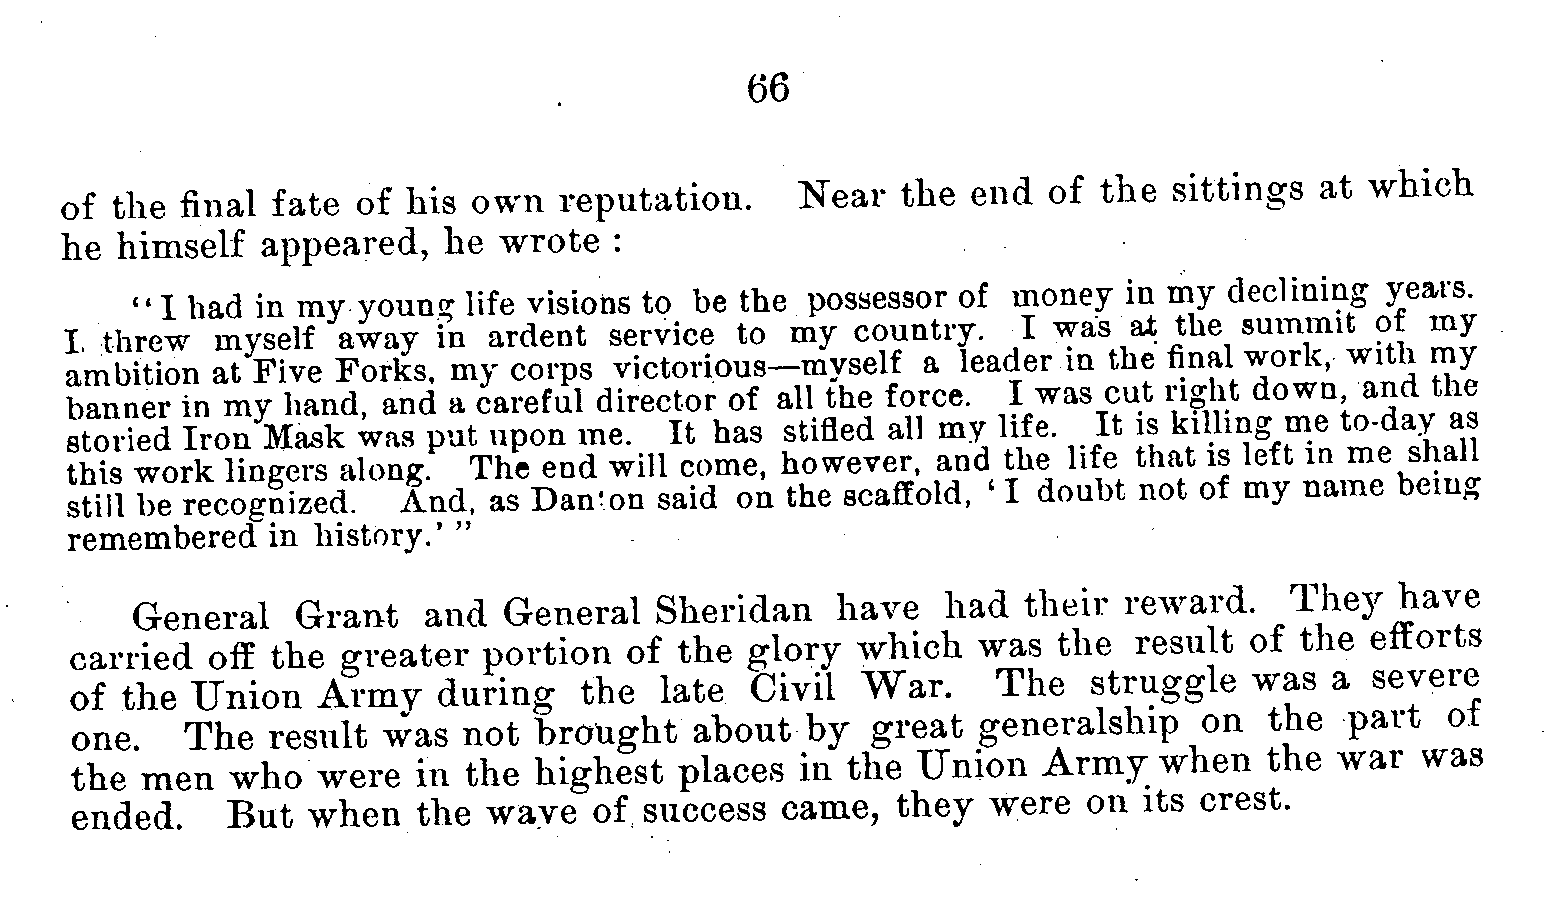 Albert Stickney: The Last Campaign of the War, Five Forks, Page 66